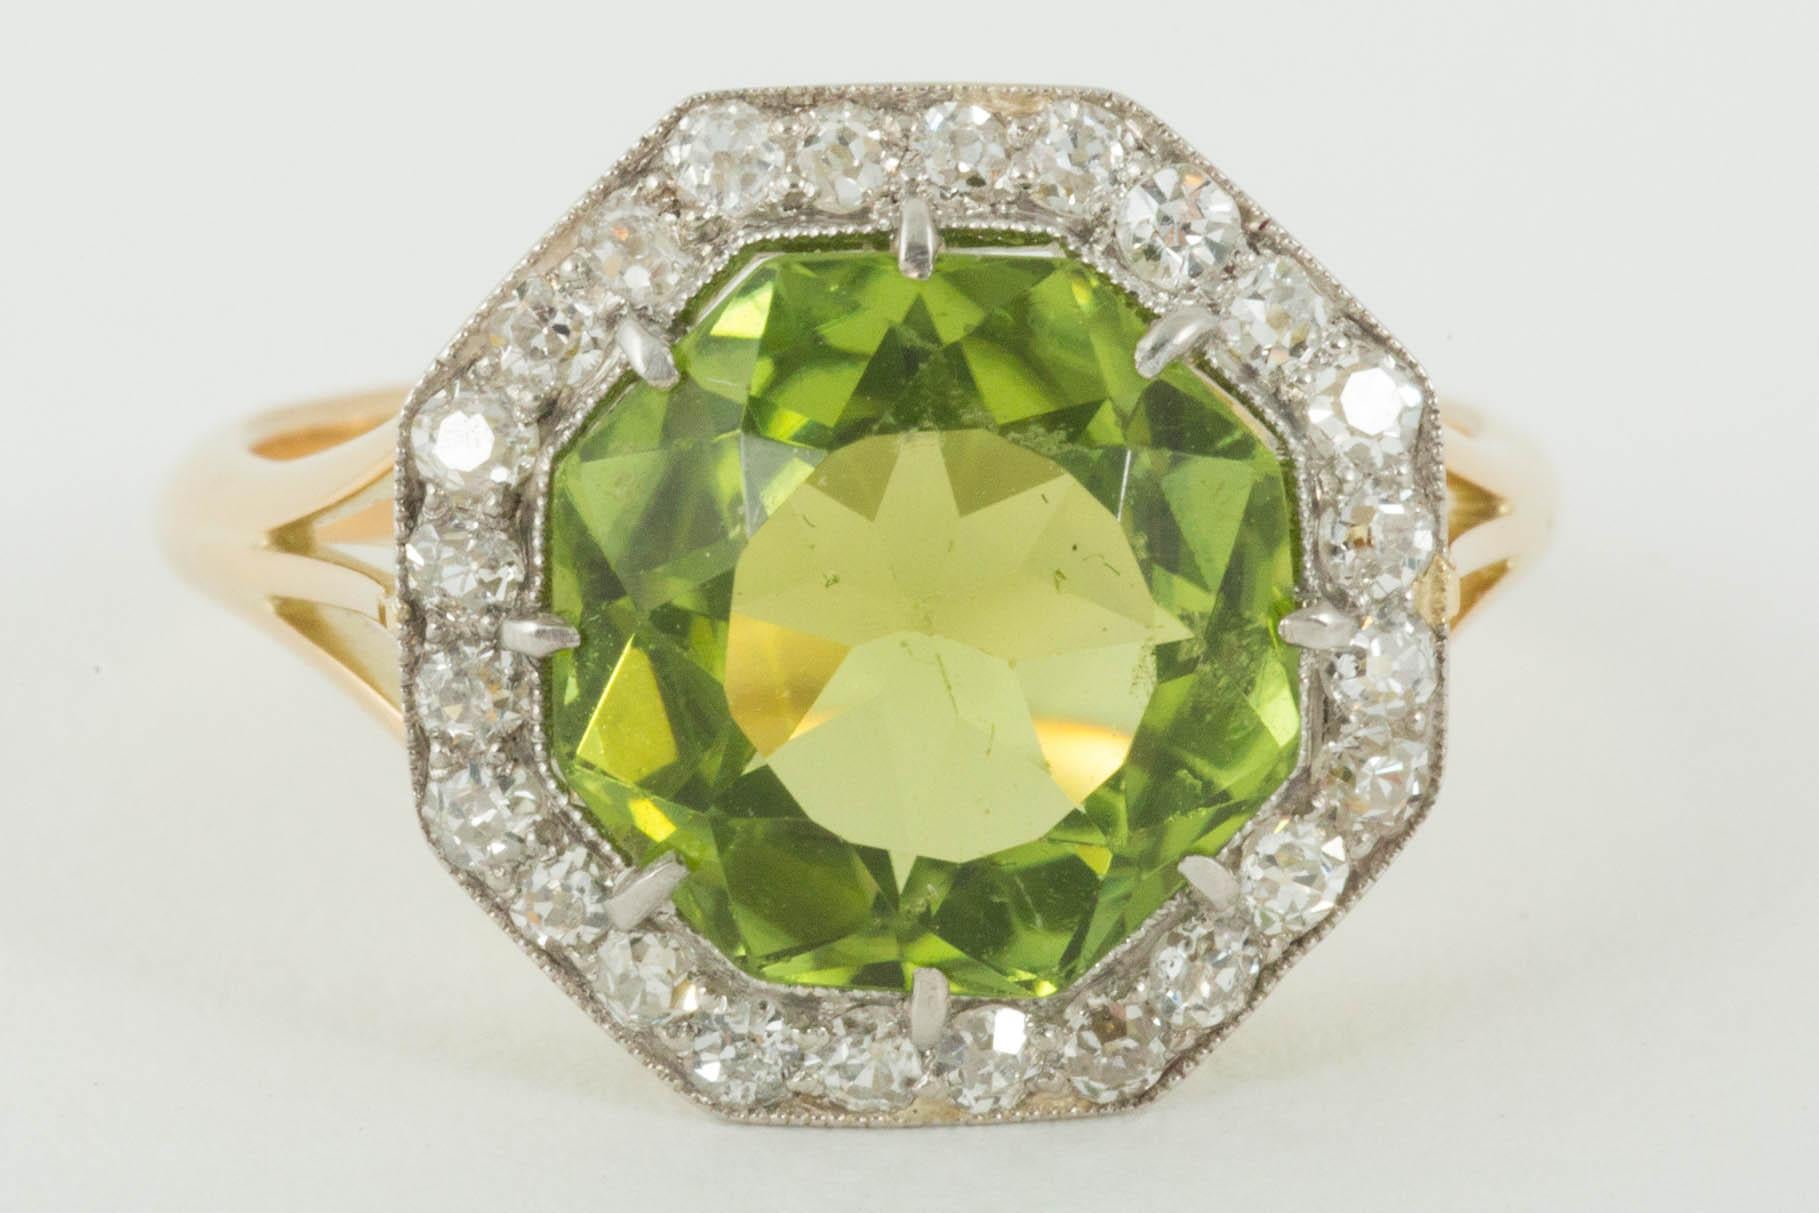 Peridot surrounded by Diamond border set in 18ct Gold and Platinum
Finger size N 1/2